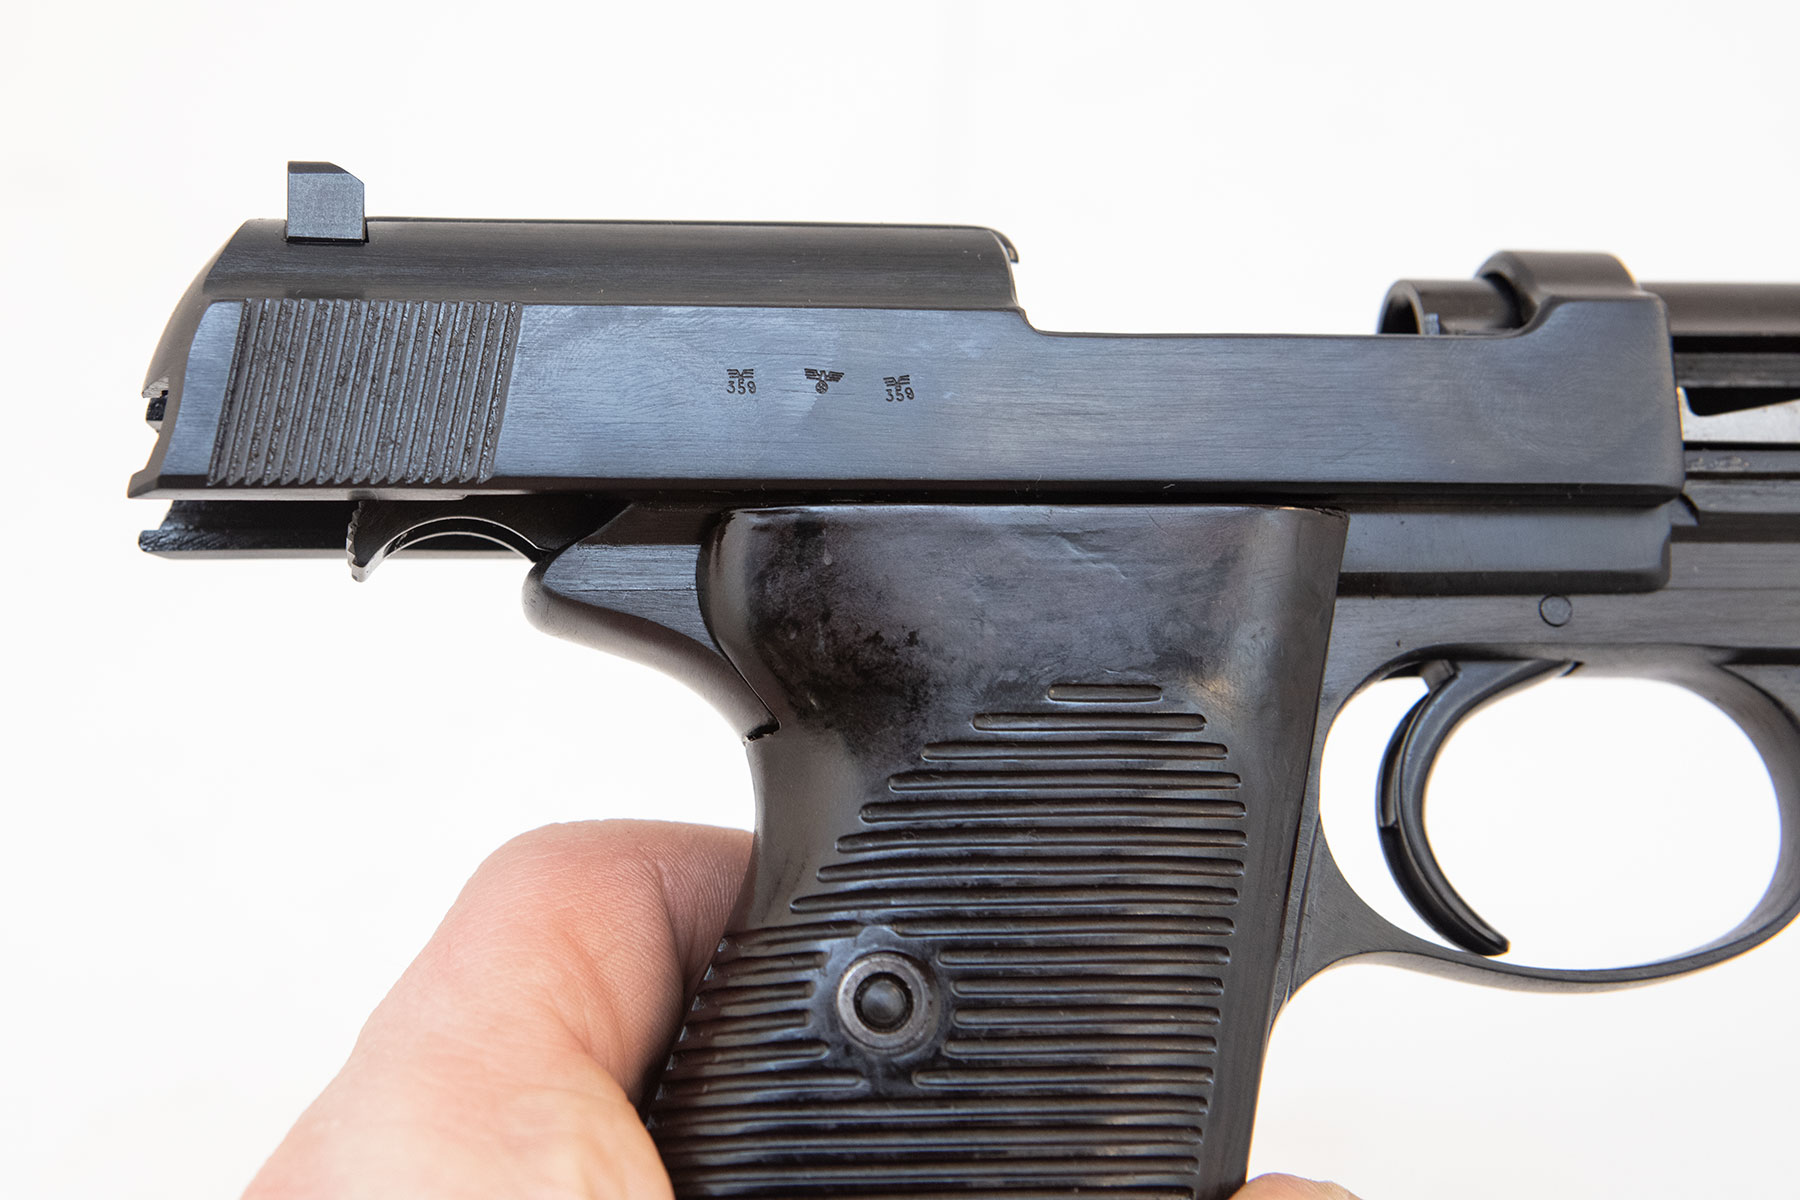 walther p38 serial number identifacation